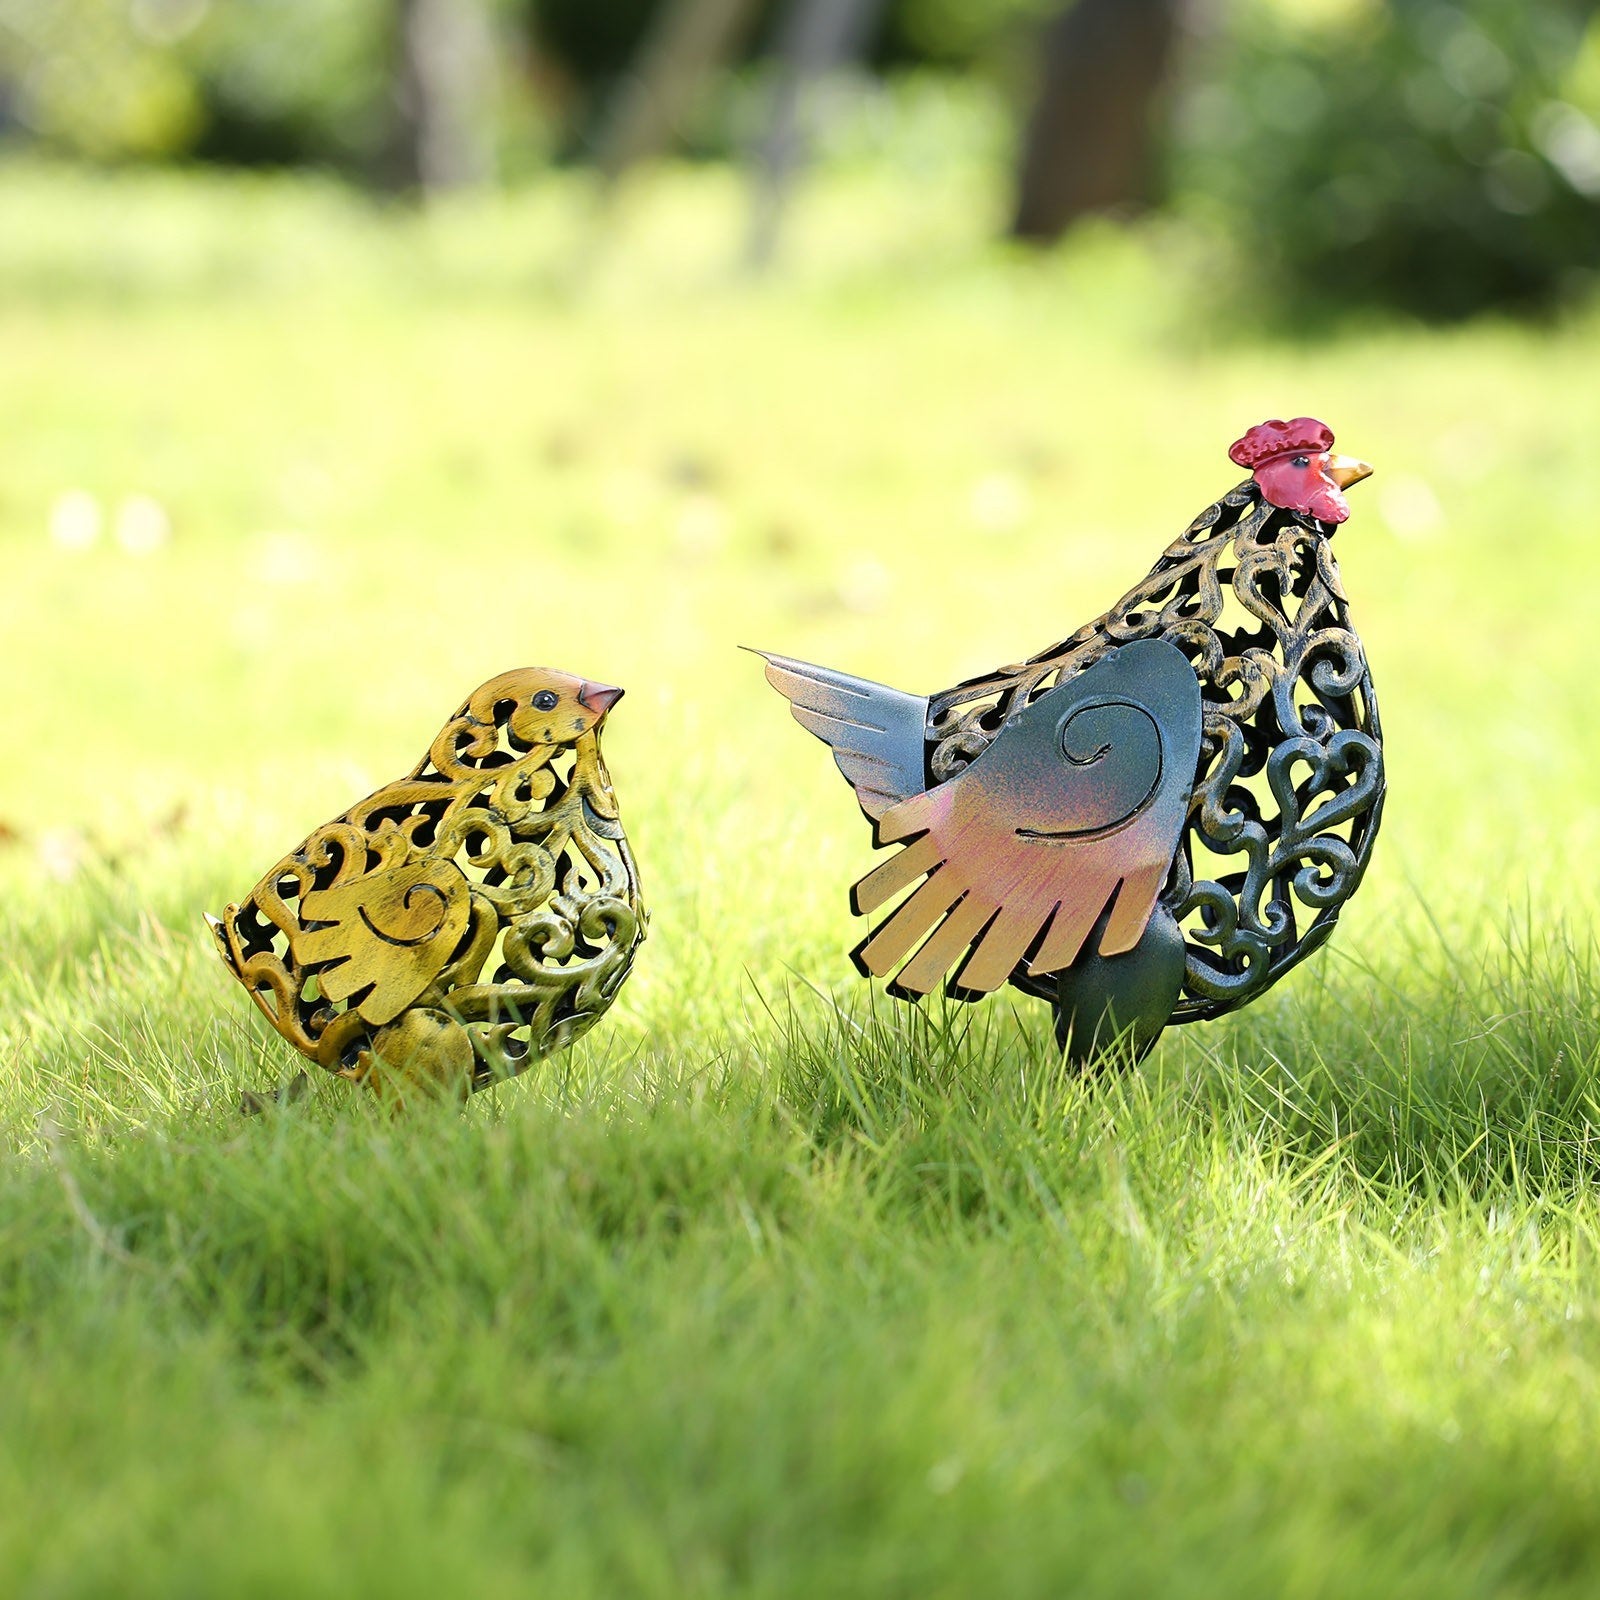 Rooster or Hen Sculpture to get classy with your garden decor!